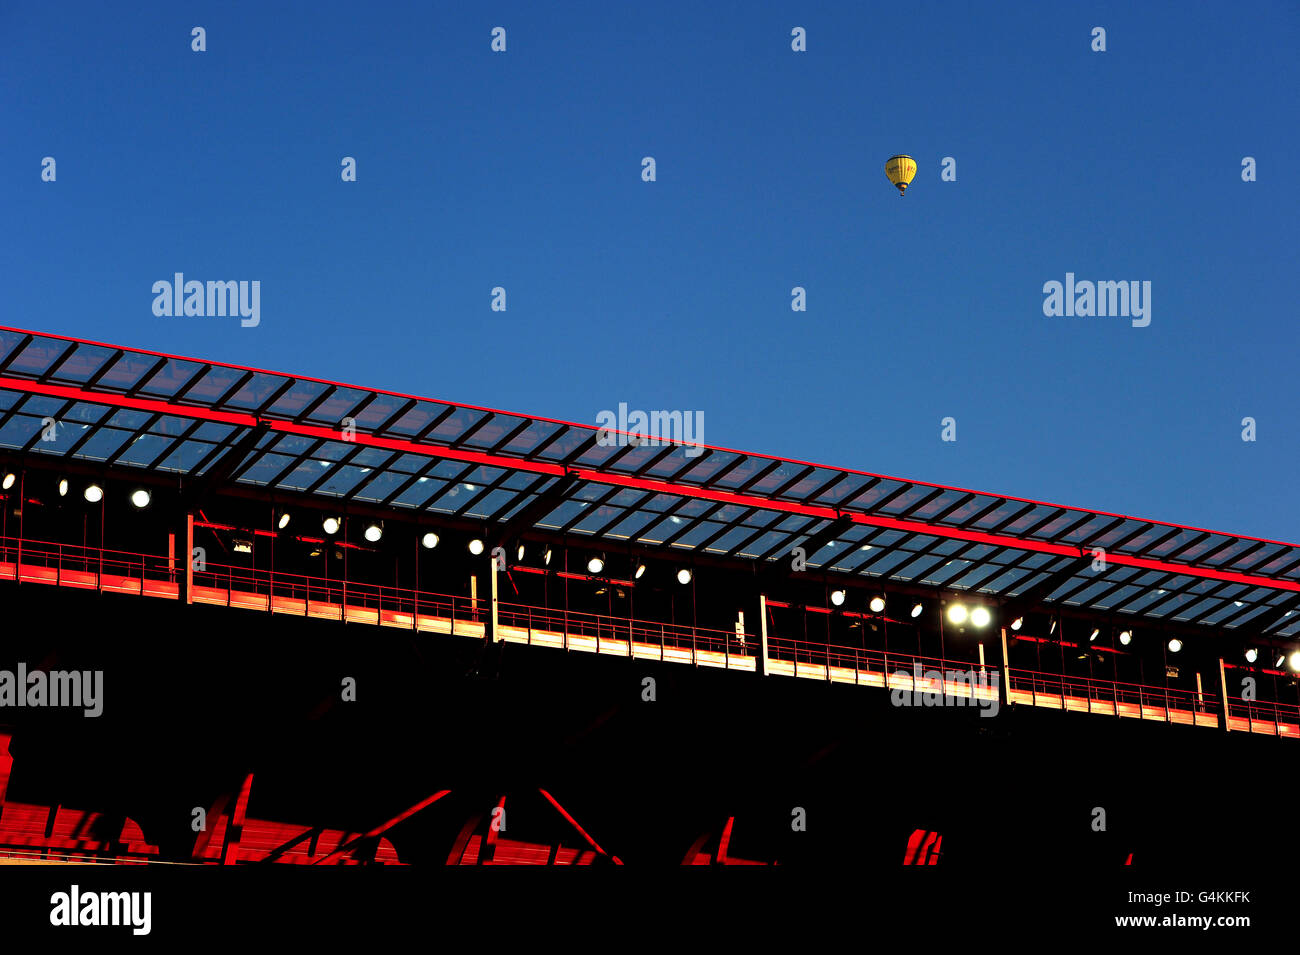 A general of a balloon flying over the Stade du Hainaut, home of Valenciennes Stock Photo